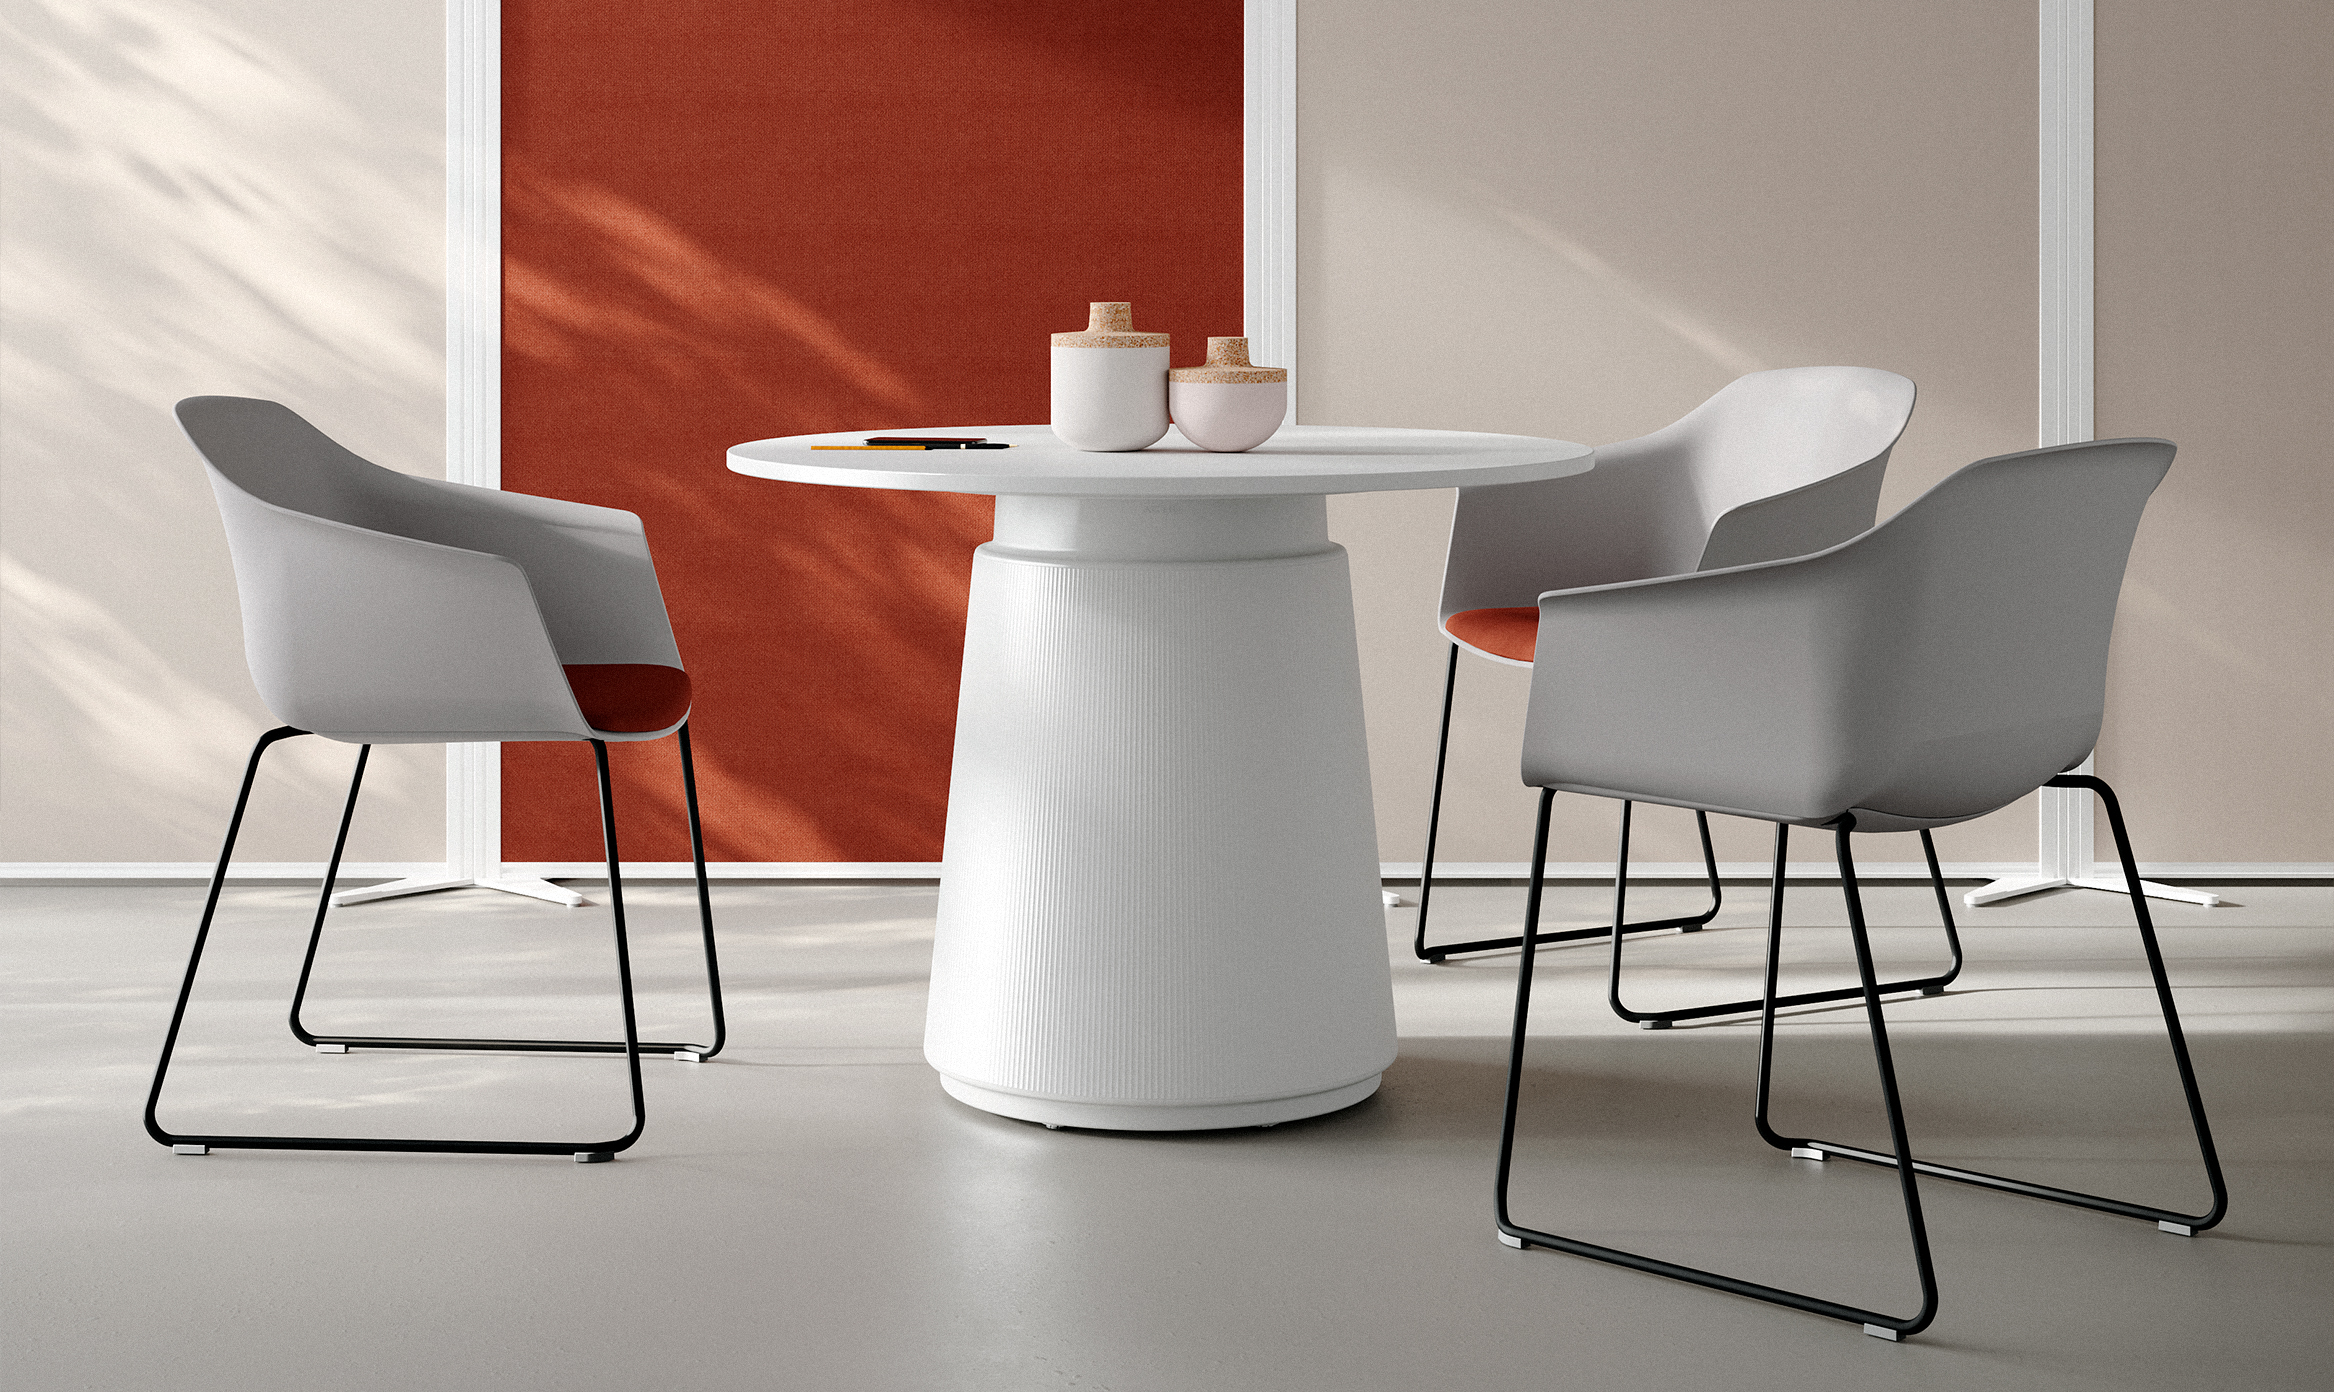 A contemporary meeting space featuring Noom 60 chairs designed by Alegre Design for Actiu. The room includes a round, white table with a cylindrical base, surrounded by four Noom 60 chairs with light gray seats and black metal legs. The chairs have integrated armrests and are accented with orange cushions. The setting is modern and minimalist, with a red and beige wall in the background and soft, natural lighting.